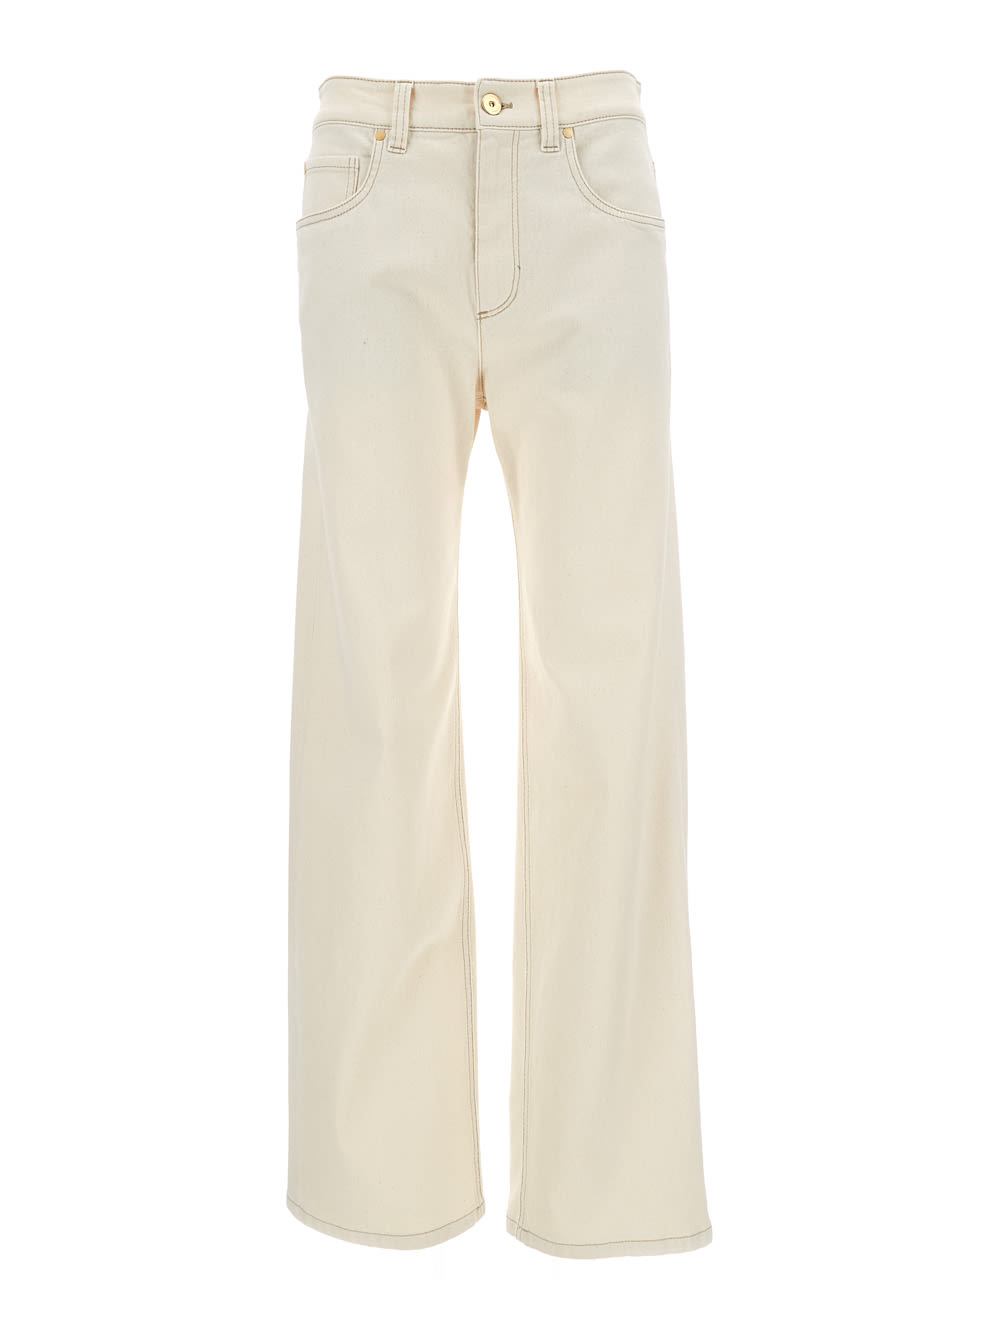 BRUNELLO CUCINELLI WHITE HIGH-WAISTED STRAIGHT LEG JEANS IN COTTON WOMAN